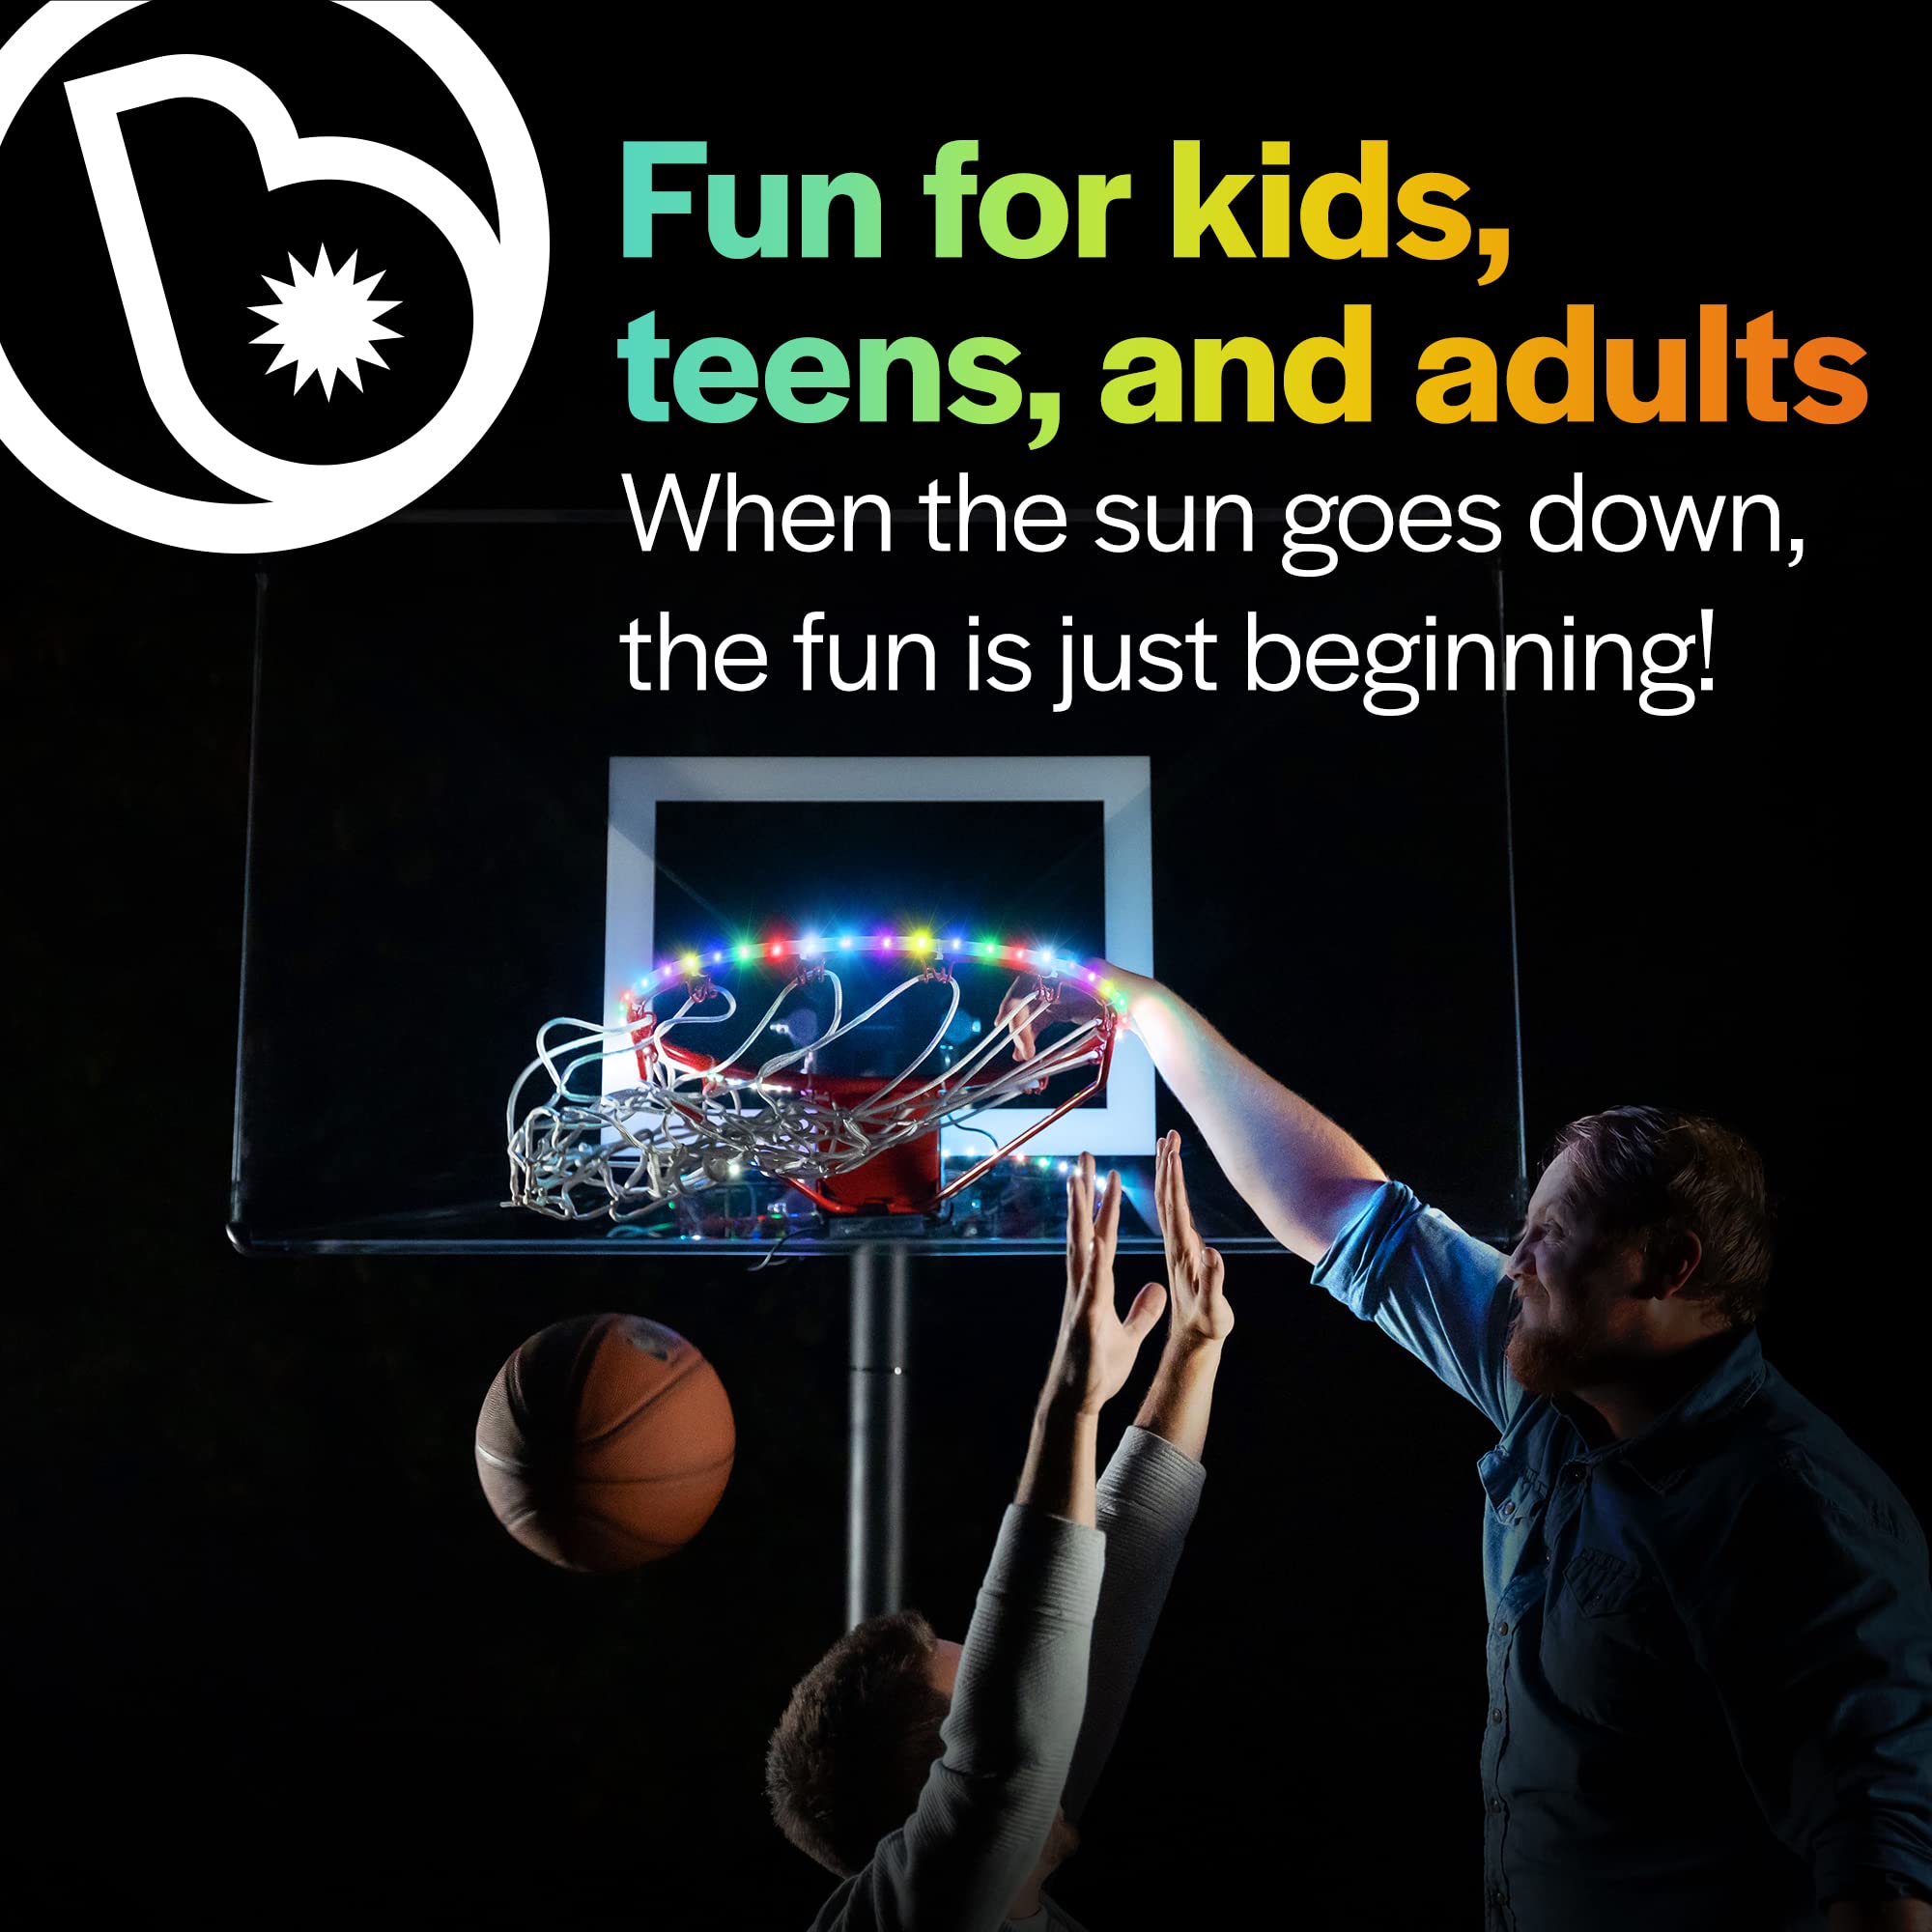 Brightz HoopBrightz LED Basketball Hoop Light, Color Changing - Motion Sensing Hoop Light - Lights Go Crazy When You Score - Fun Unique for Adults, Boys, & Girls Who Love Basketball